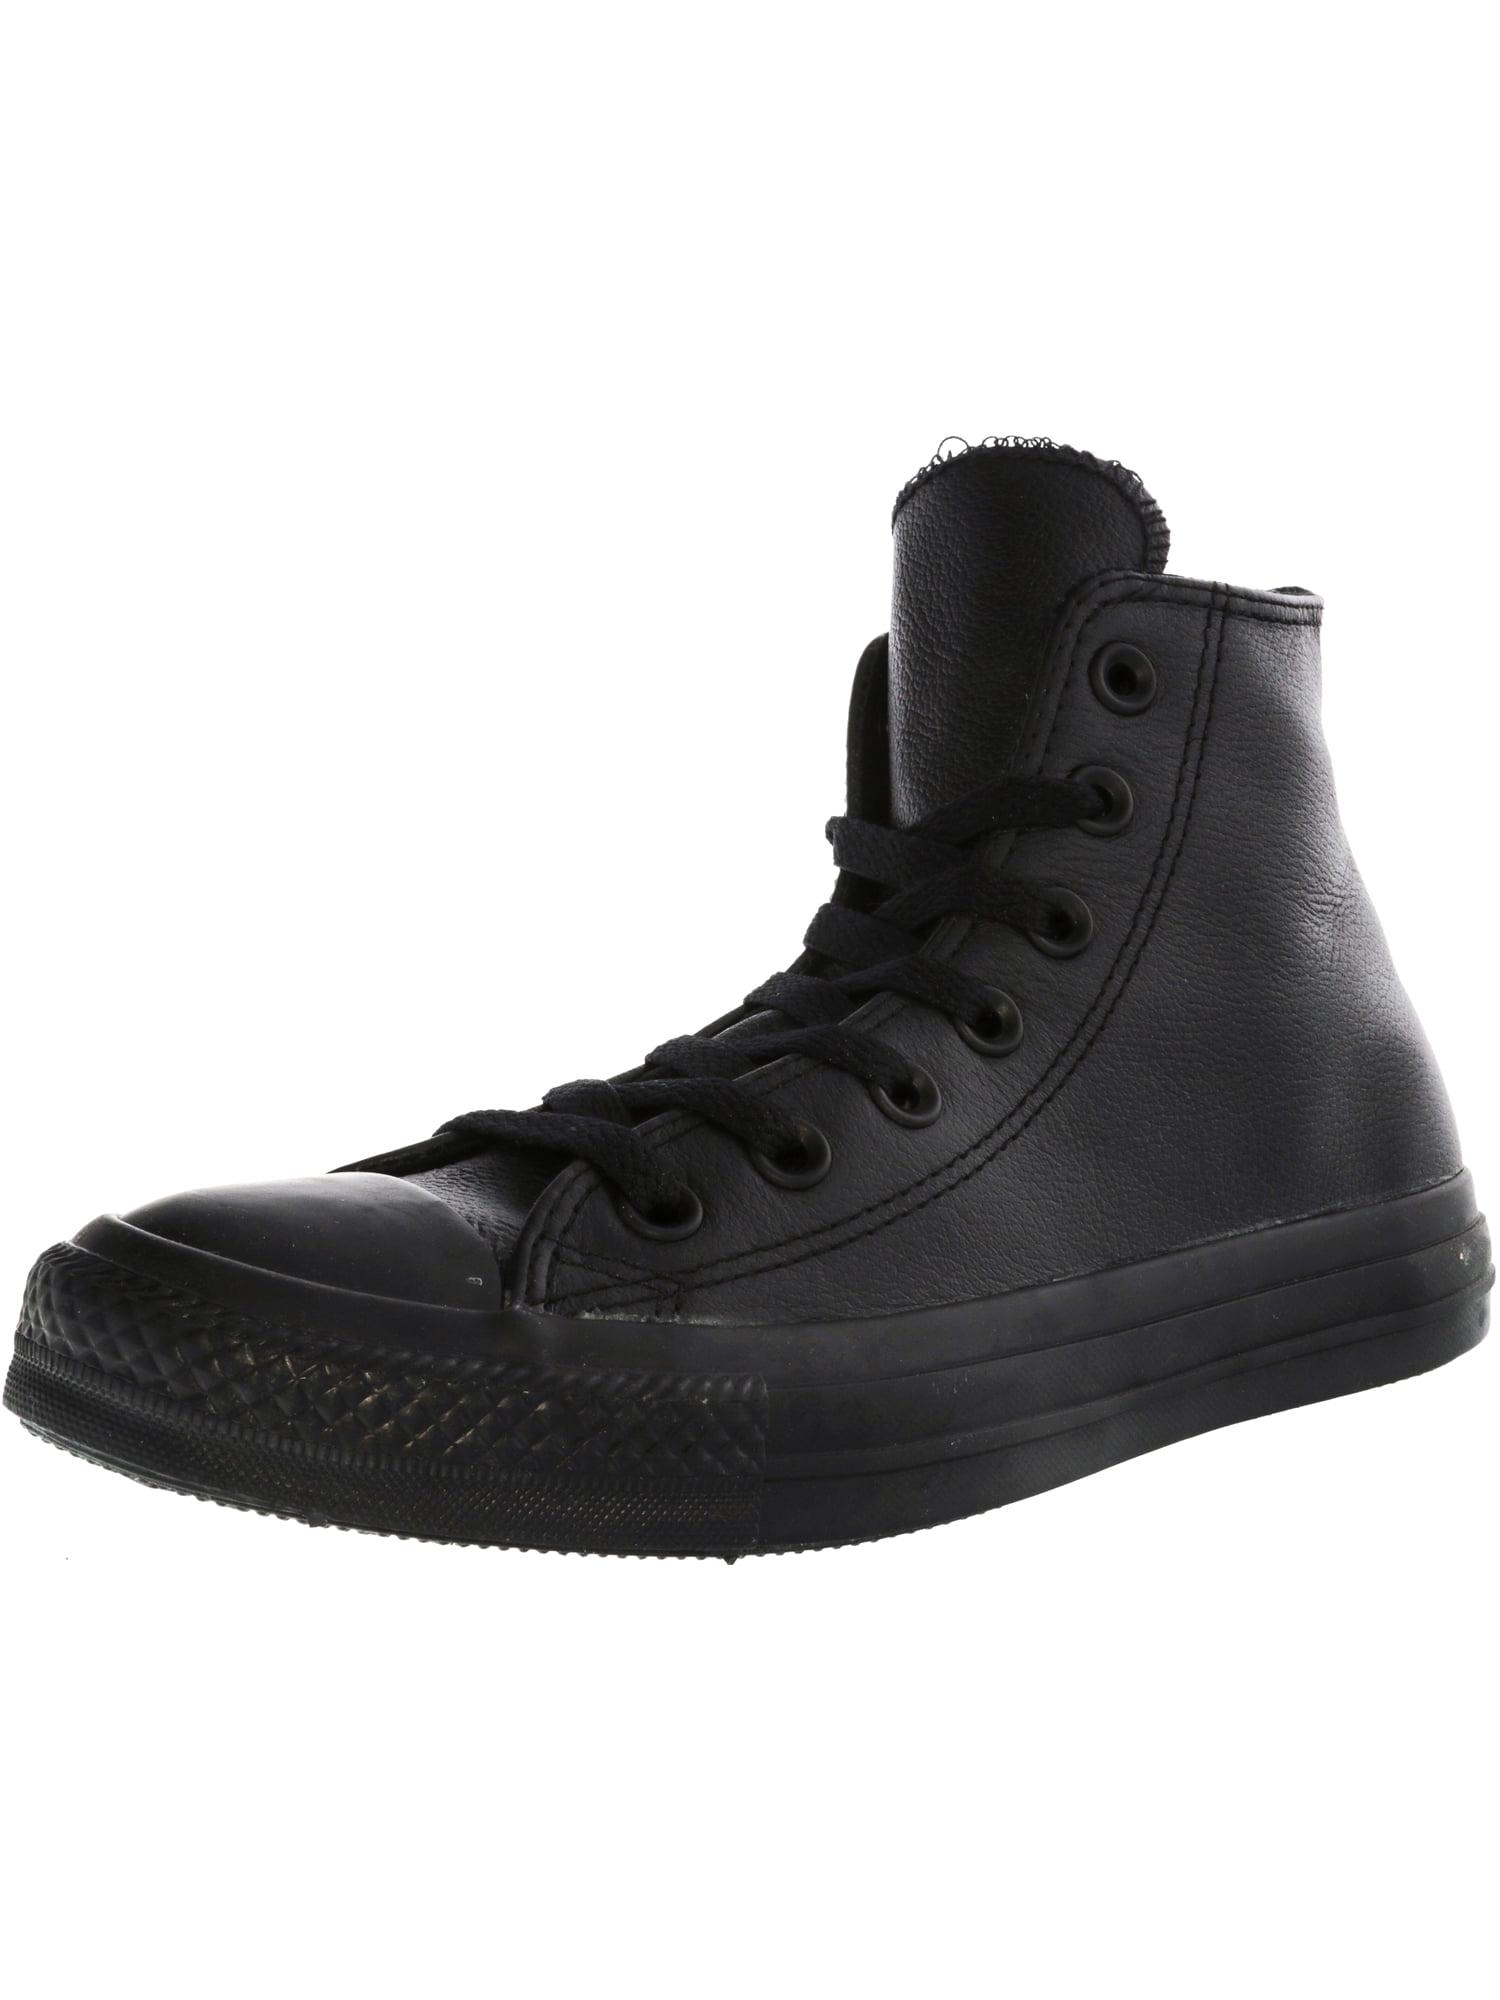 Photo 1 of Converse Chuck Taylor All Star High Leather